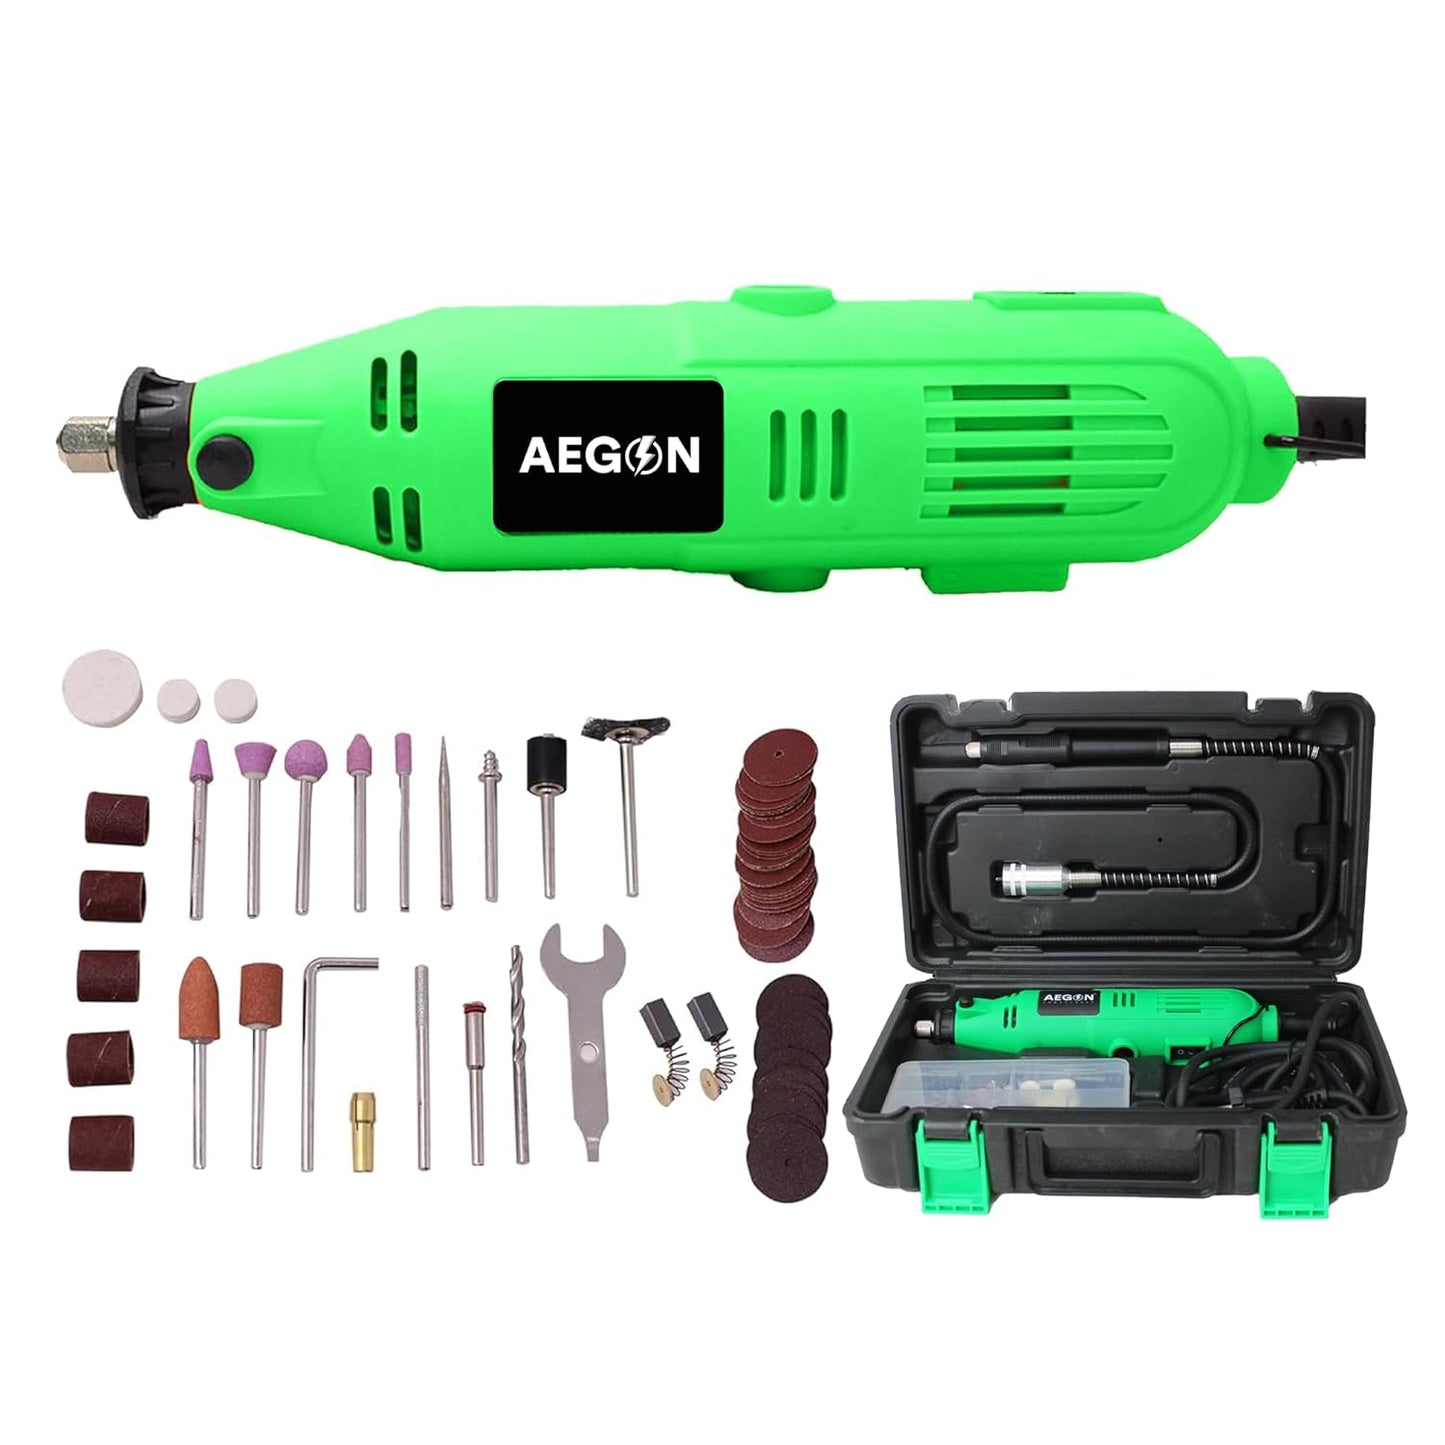 AEGON AG-DG130 Multifunctional Mini Rotary 52 Pieces Die Grinder Kit with Flexible Shaft and Variable Speed for Jade Carving, Wood Punching, Sanding, Buffing, Polishing, Engraving (130W, 52 Pcs)